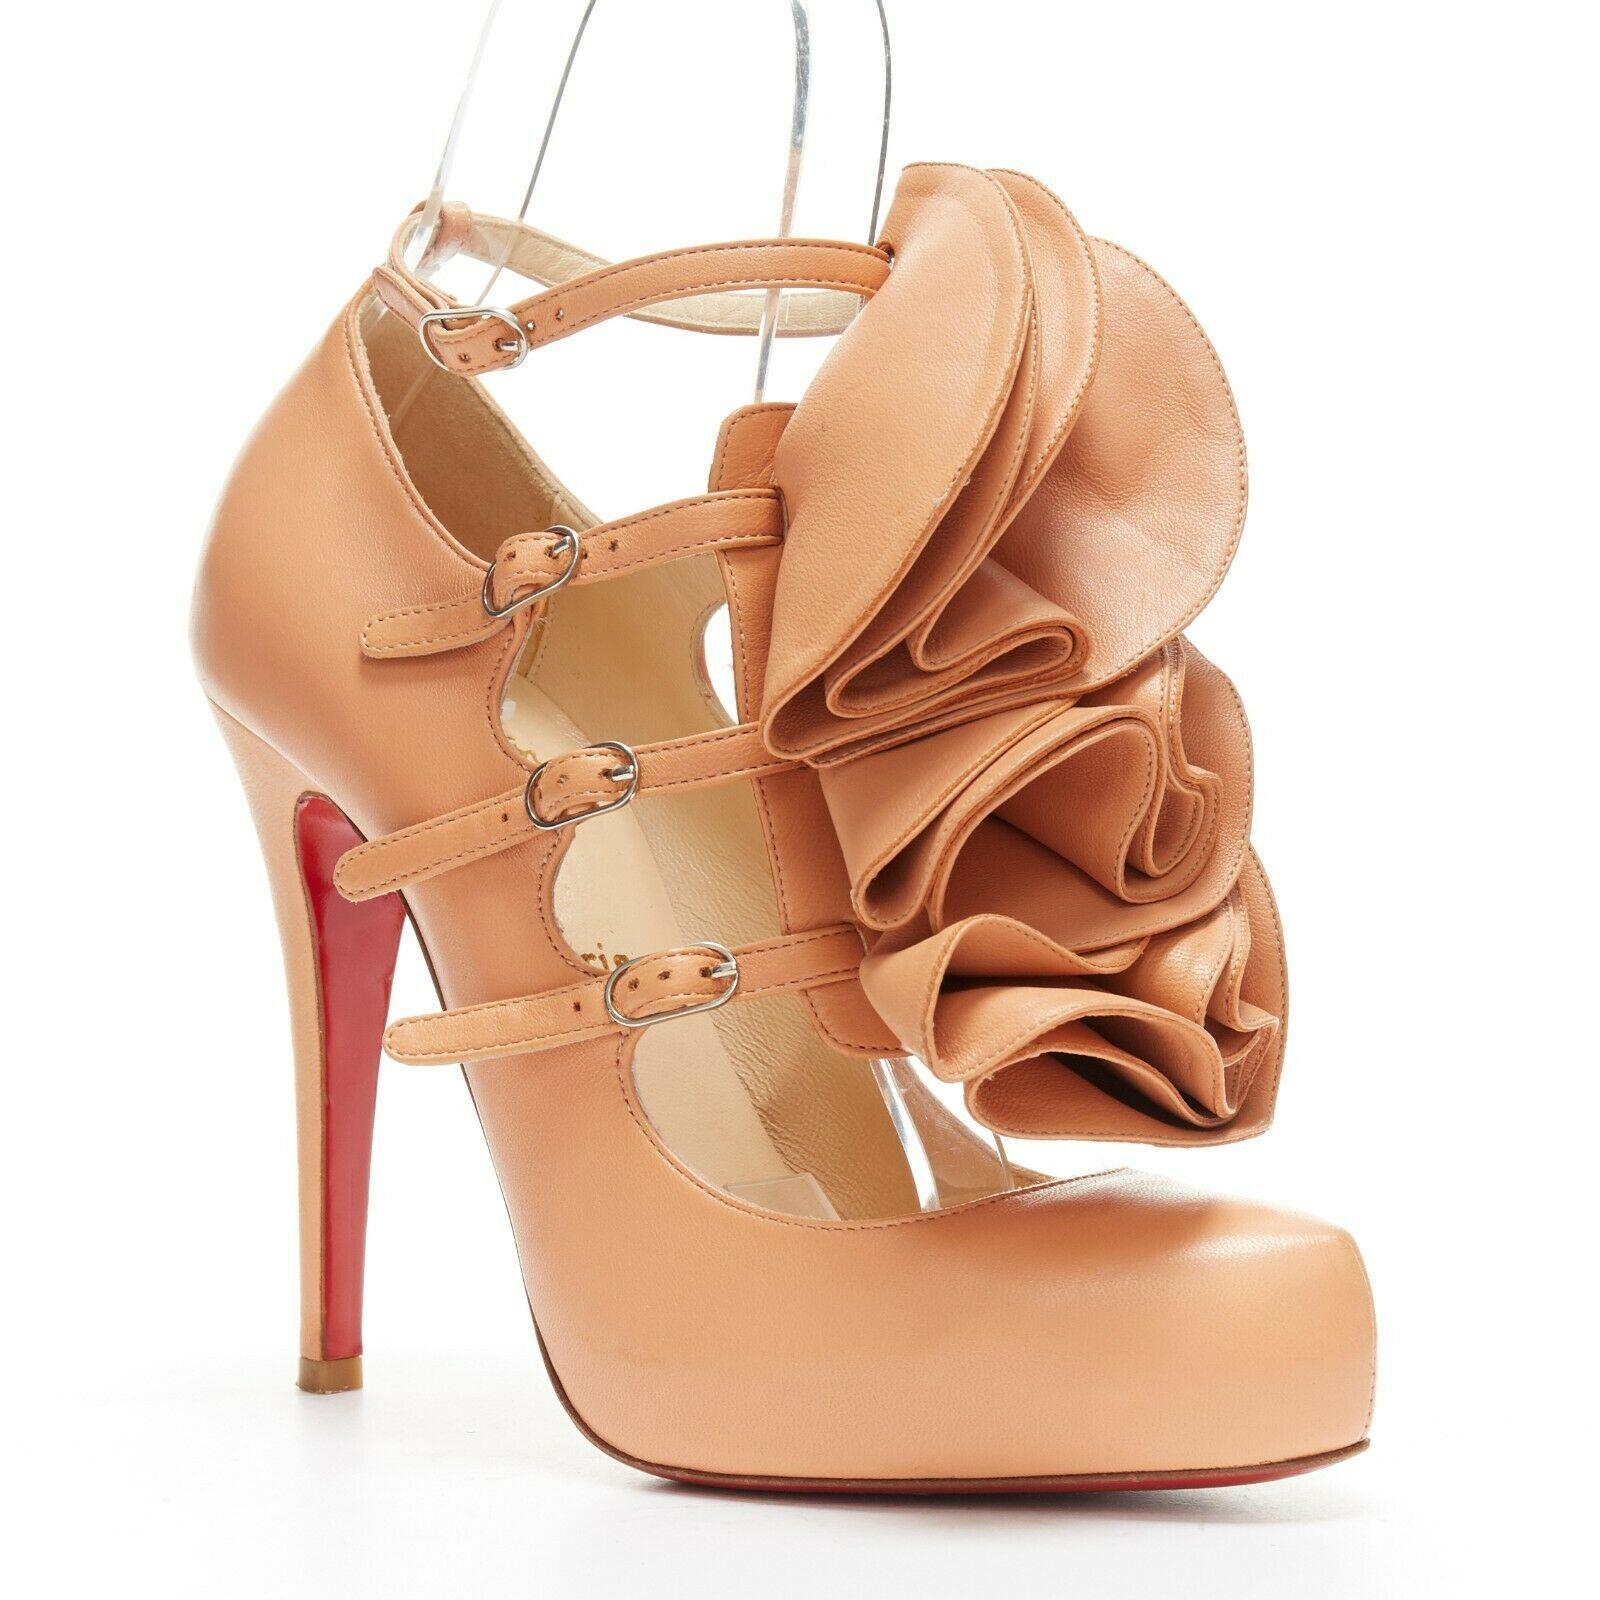 CHRISTIAN LOUBOUTIN Dillian 120 nude leather ruffle multi strap platform EU37.5
CHRISTIAN LOUBOUTIN
Dillon 120. 
Nude leather upper. Floral ruffle patch at front (removable). Multi-strap. 
Silver-tone buckle closure. Ankle strap. Covered heel. Slim